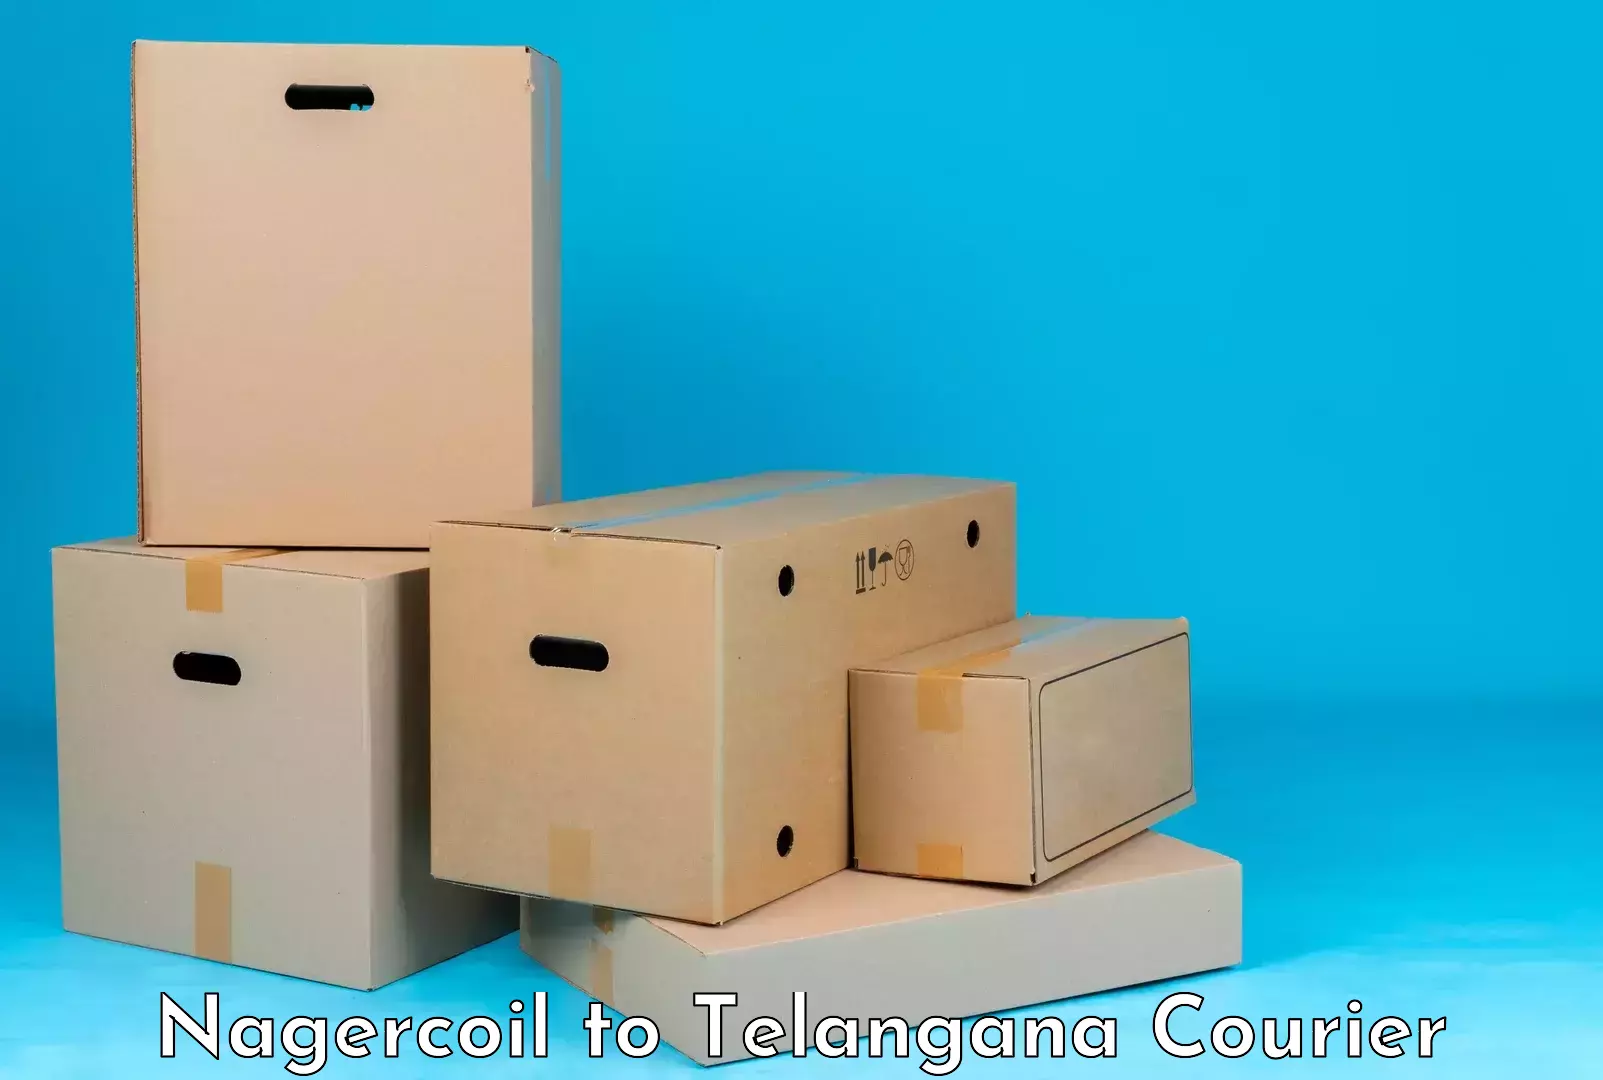 Luggage delivery app Nagercoil to Telangana